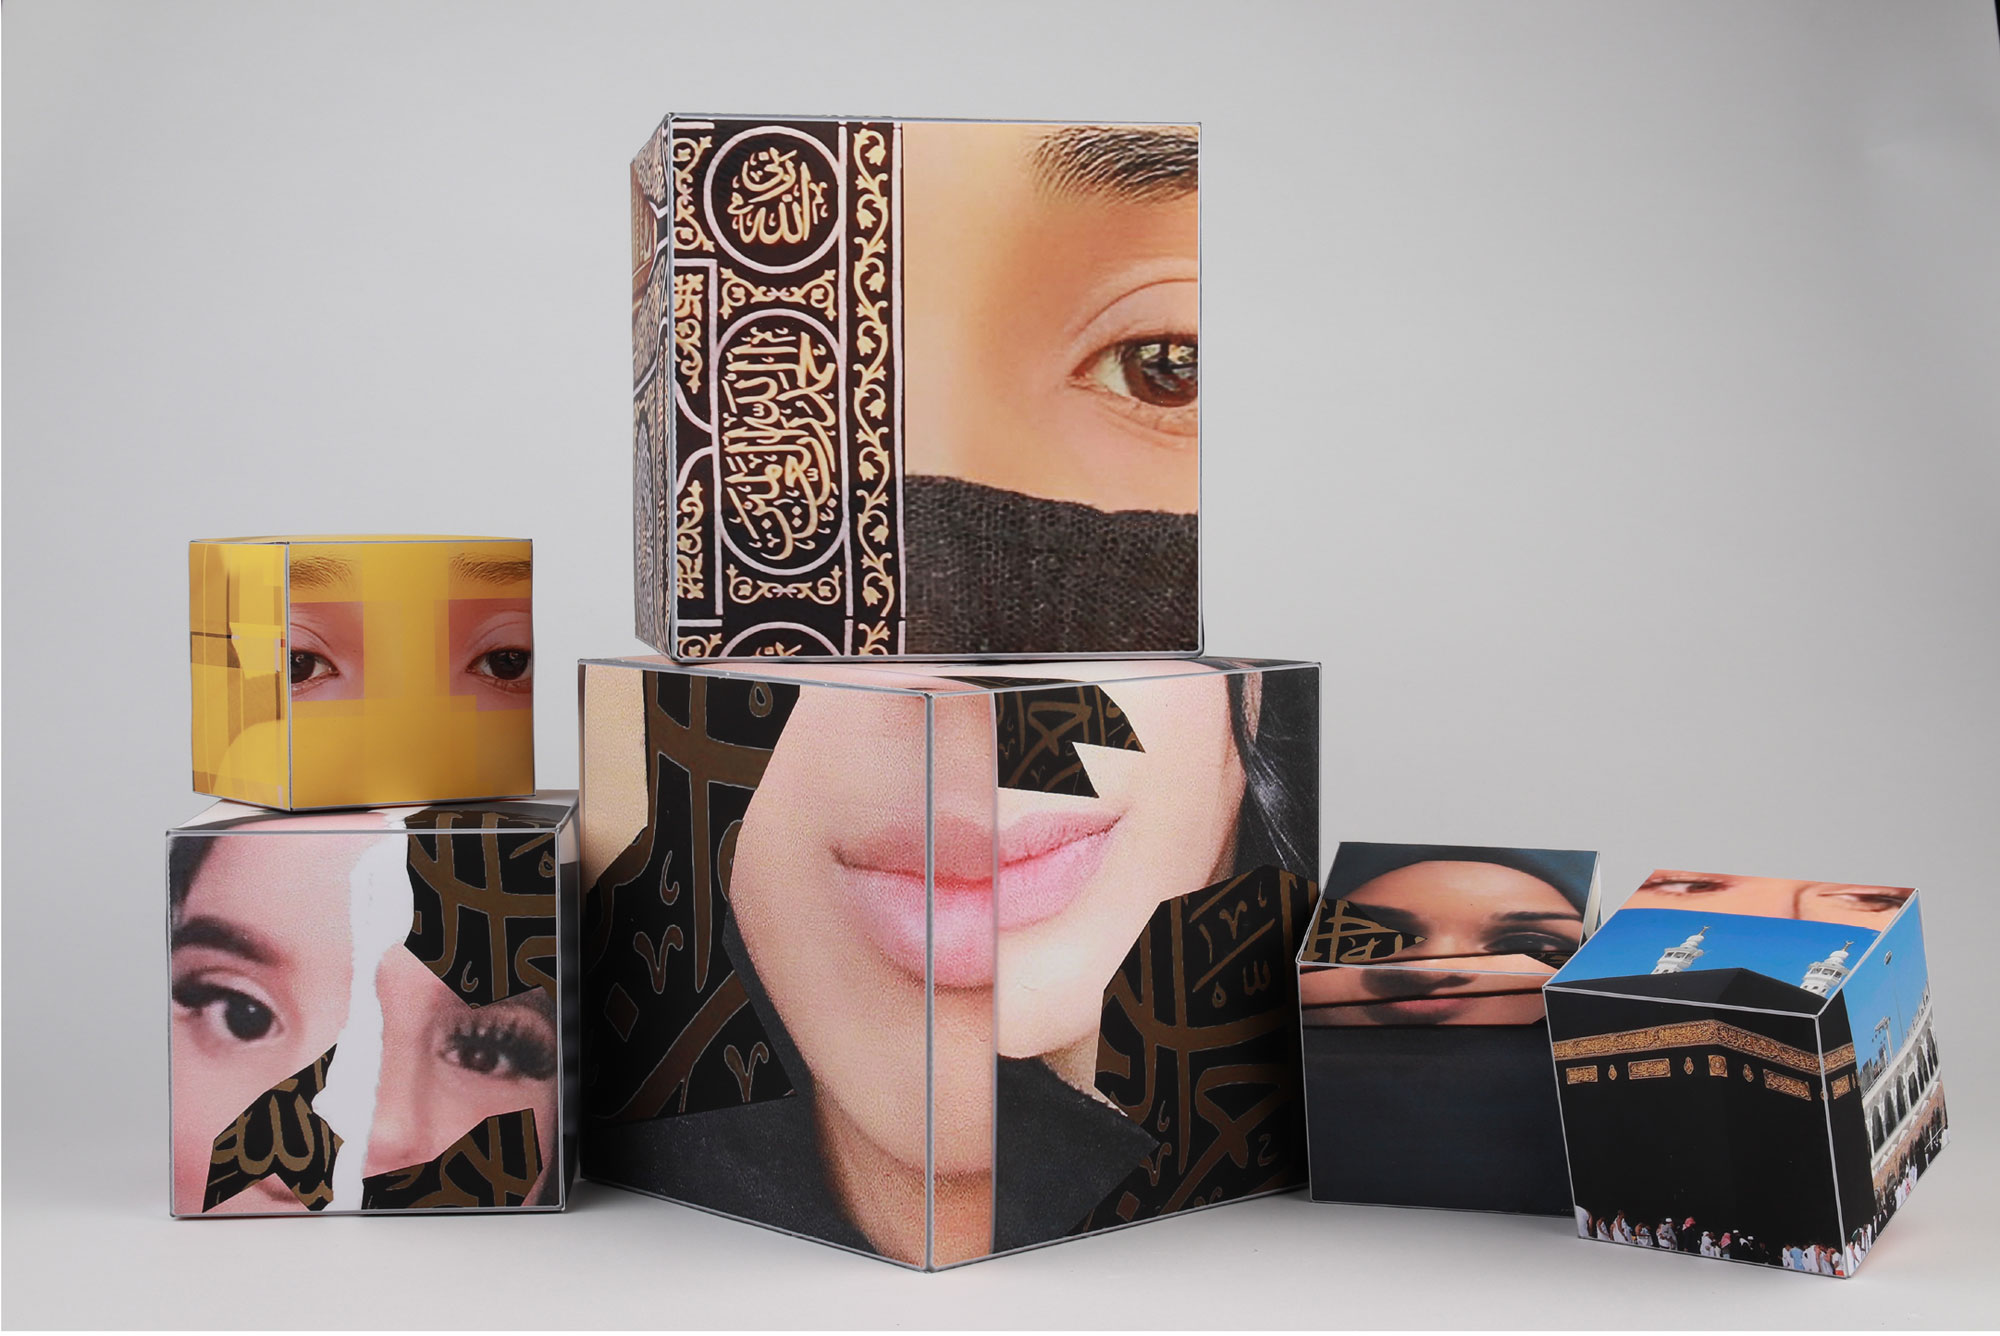 A series a cubes with photographs printed on them are stacked against a white background. The cubes show a young woman eyes and mouth, alongside architectures from the Middle East. The female characters represented on the cube appear to wear a head scarf.